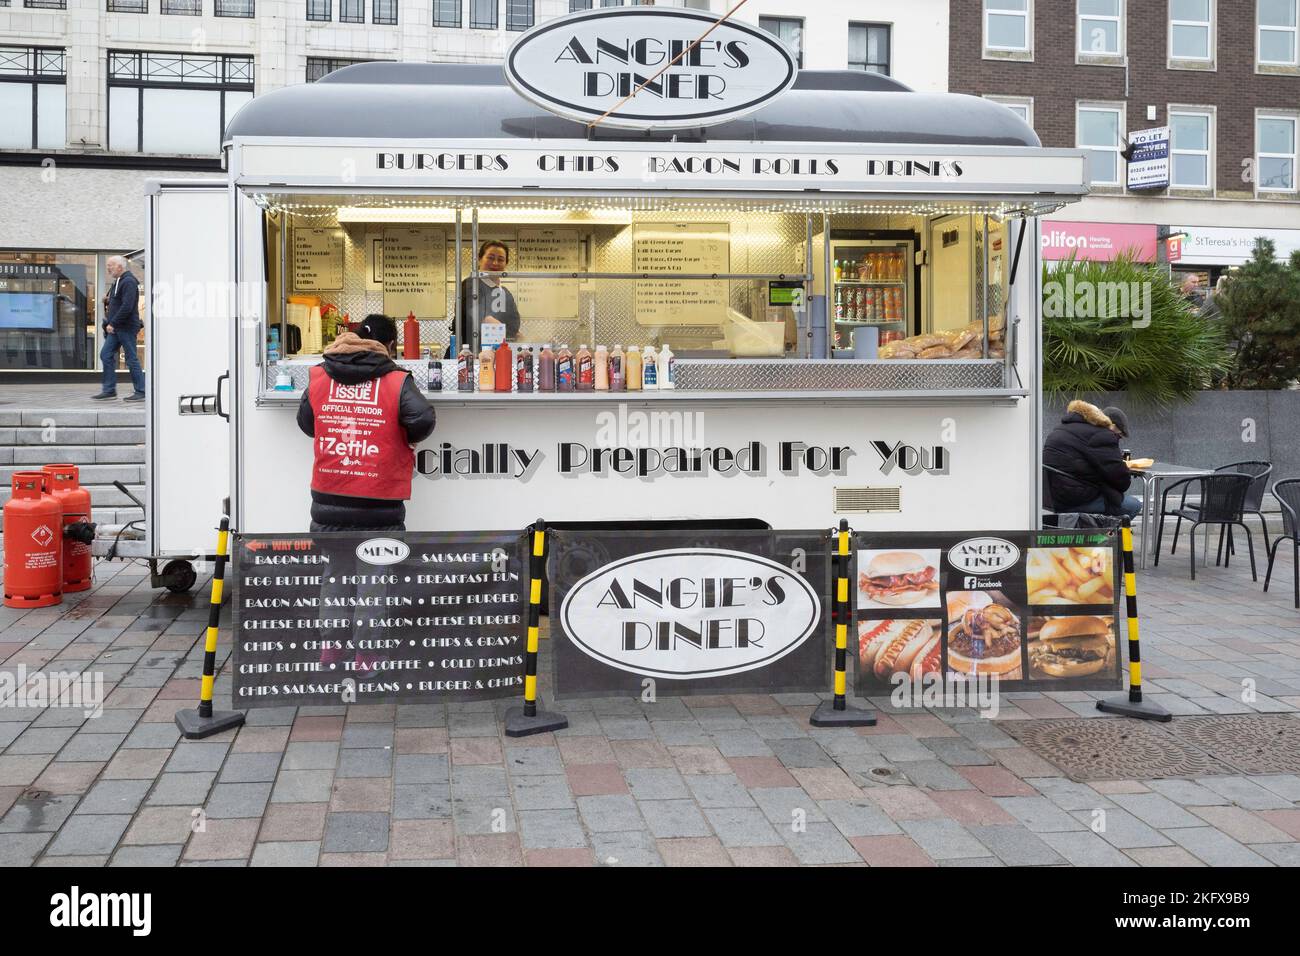 A Big Issue Vendor,  buying food and drink at Angie's Diner fast food stall in the weekly Market Darlington Co. Durham England UK Stock Photo